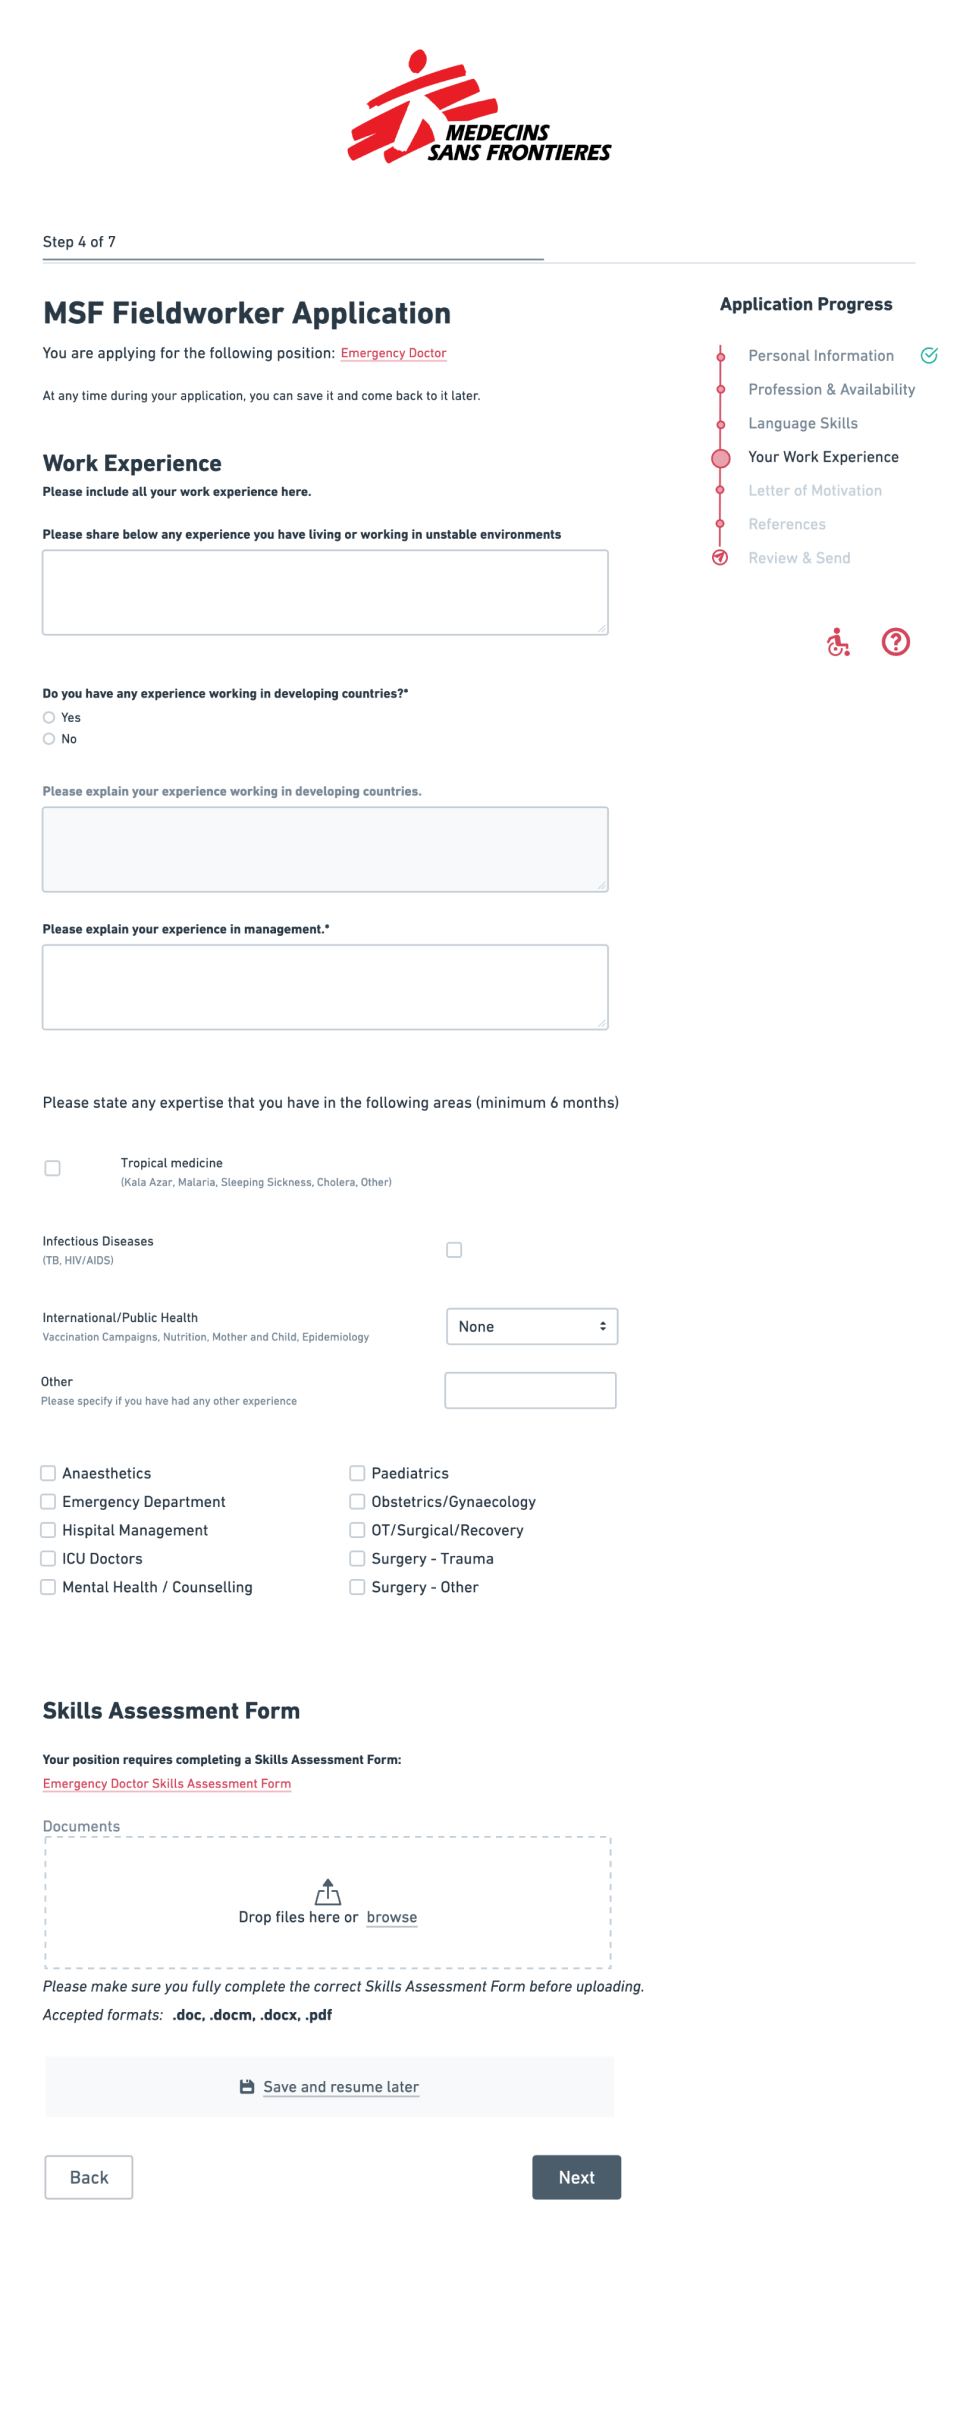 MSF Application Form Redesign - Screen 6_ Work Experience@2x 1